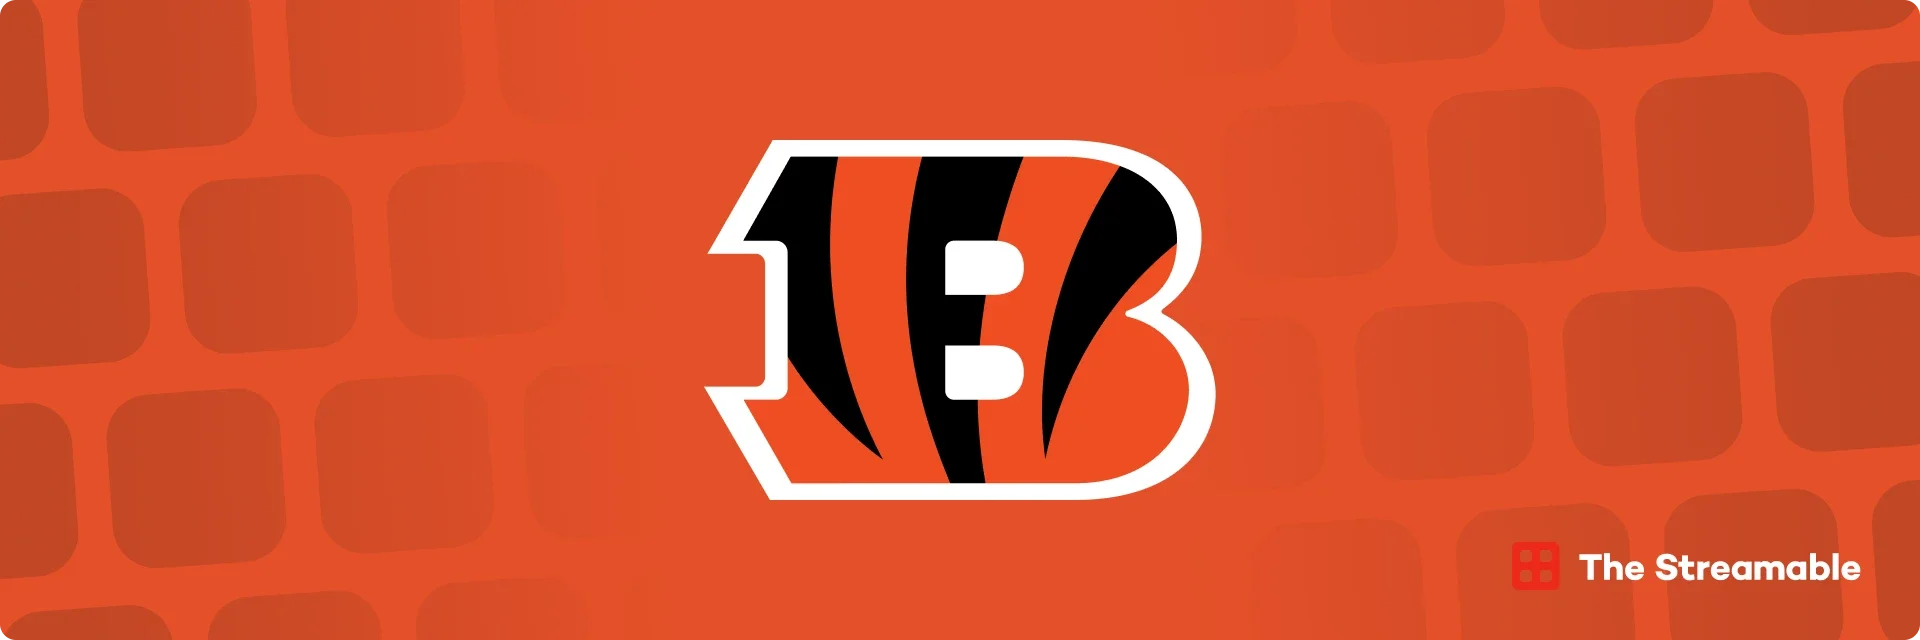 How to Watch Cincinnati Bengals Games Online Live Without Cable